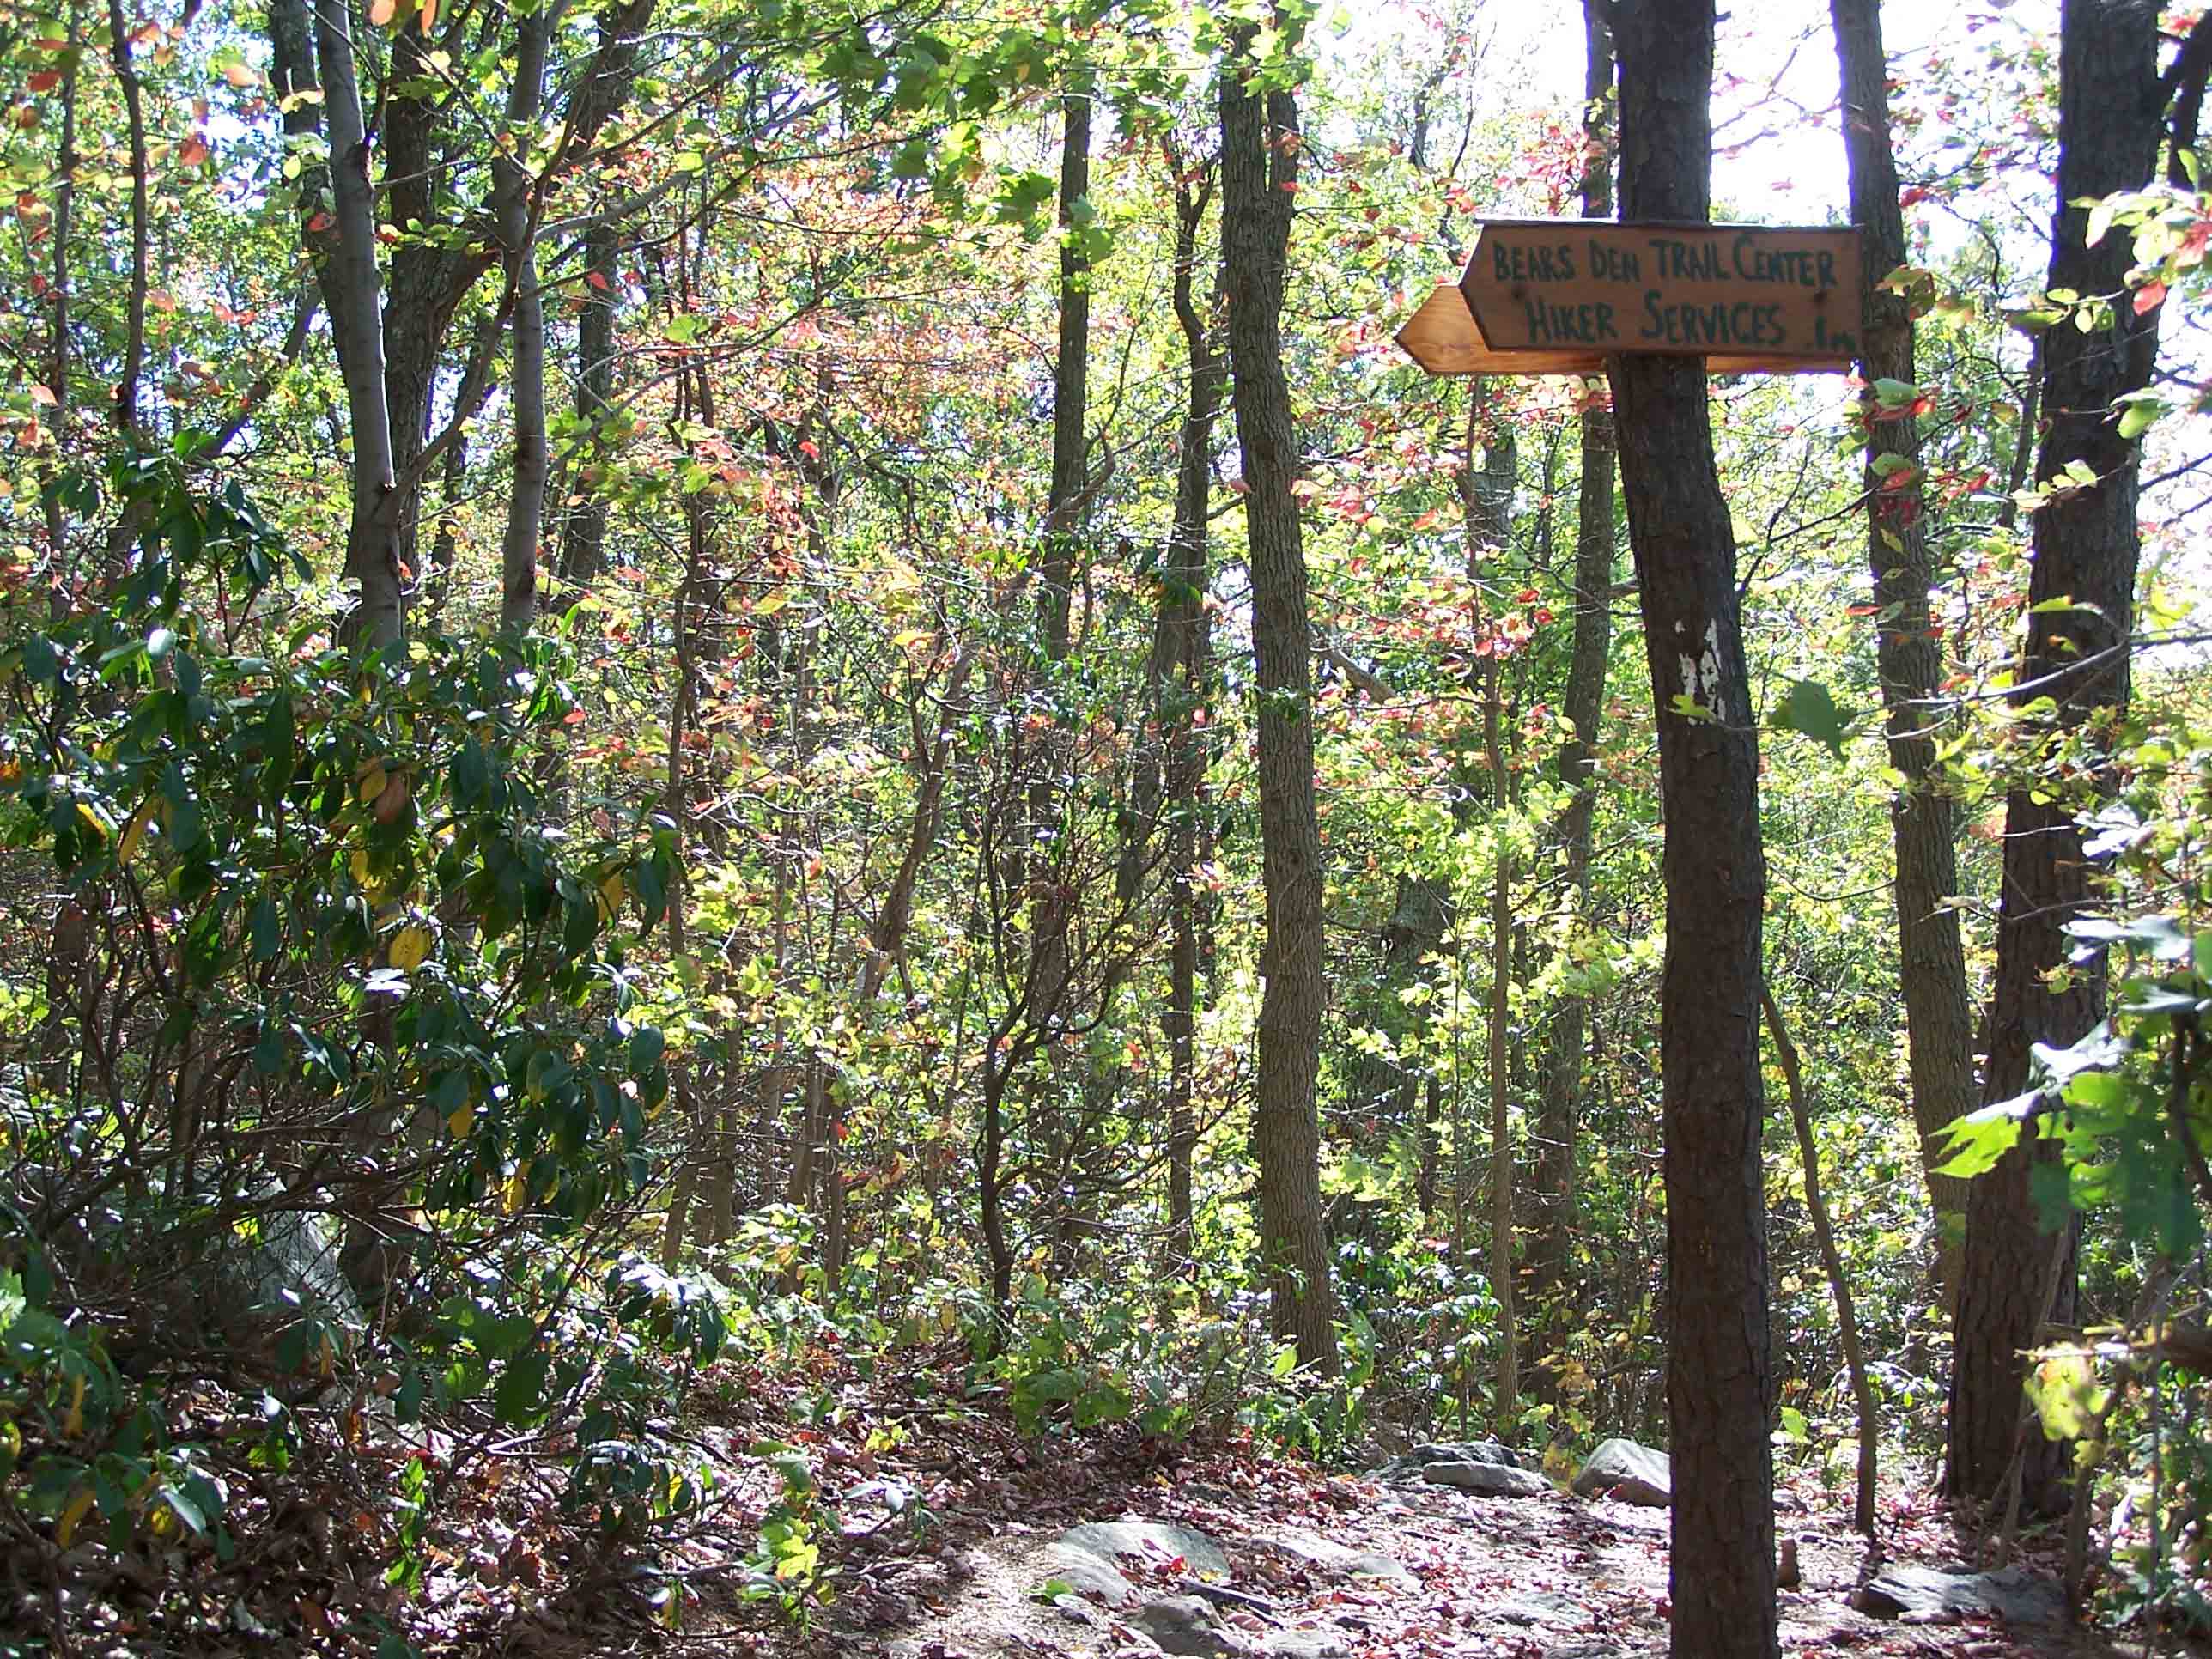 mm 0.6 - Sign for trail to Bears Den Hostel. Courtesy at@rohland.org